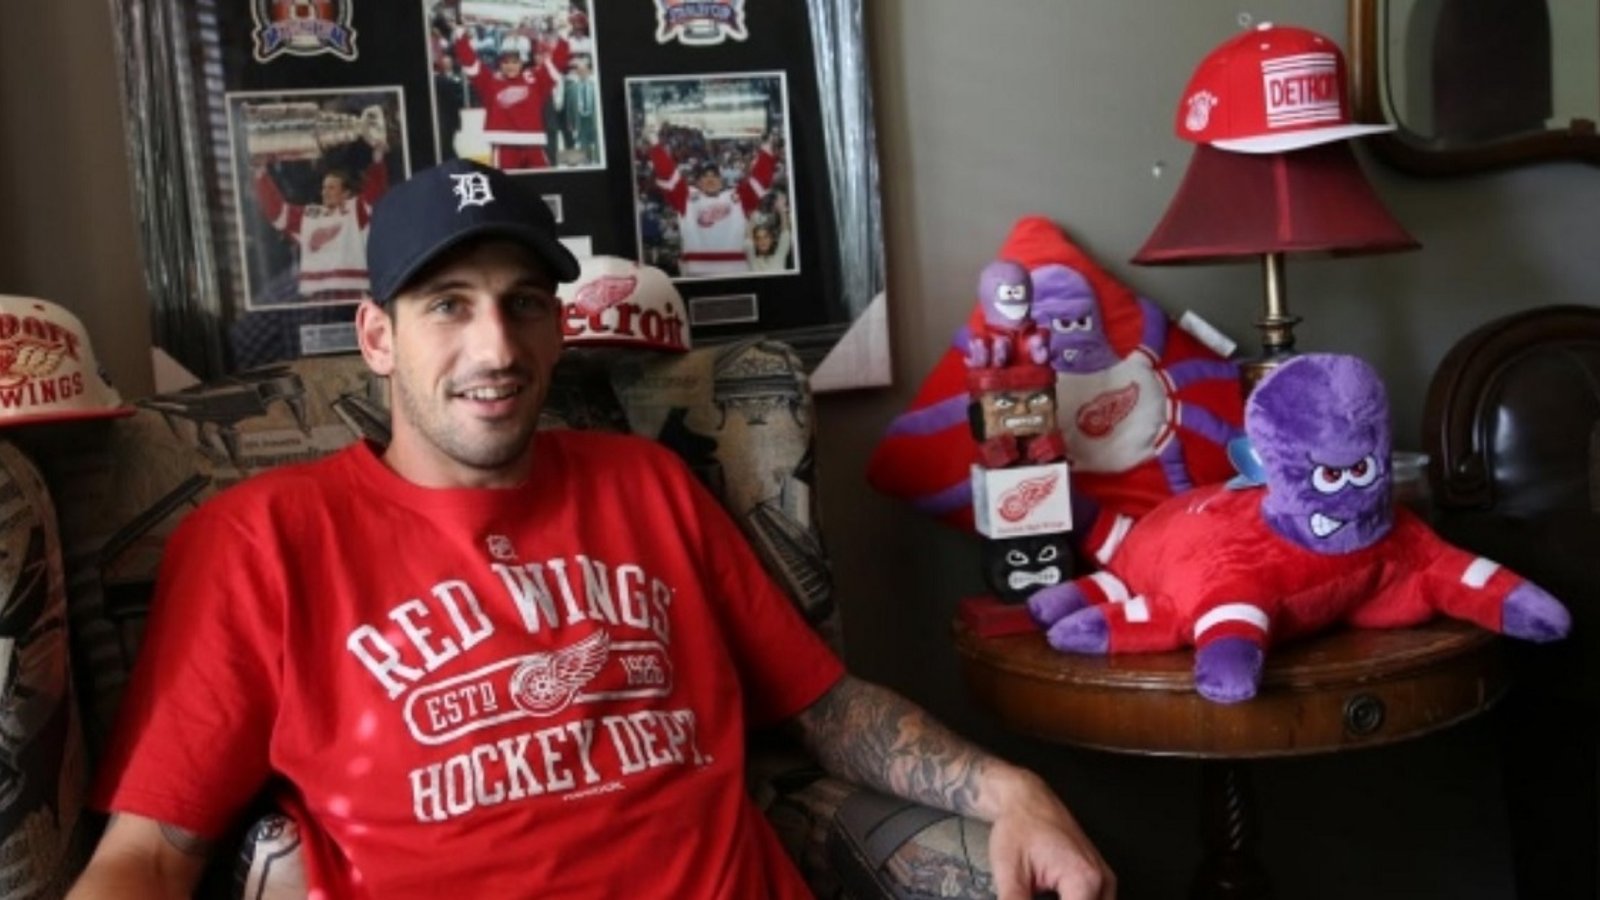 Extremely controversial decision has NHL fan facing lifetime ban.